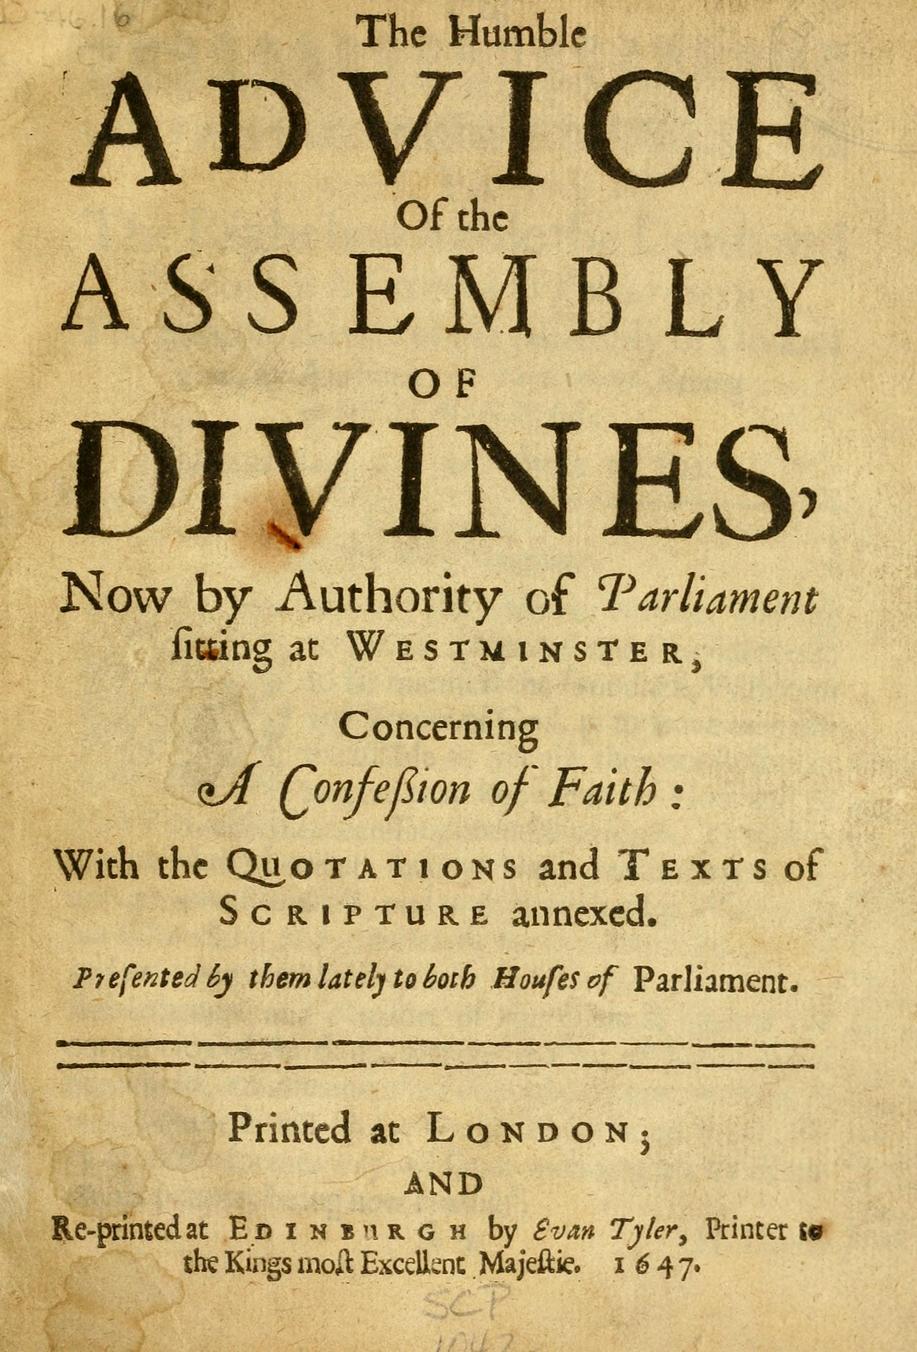 Original Westminster Confession of Faith title page